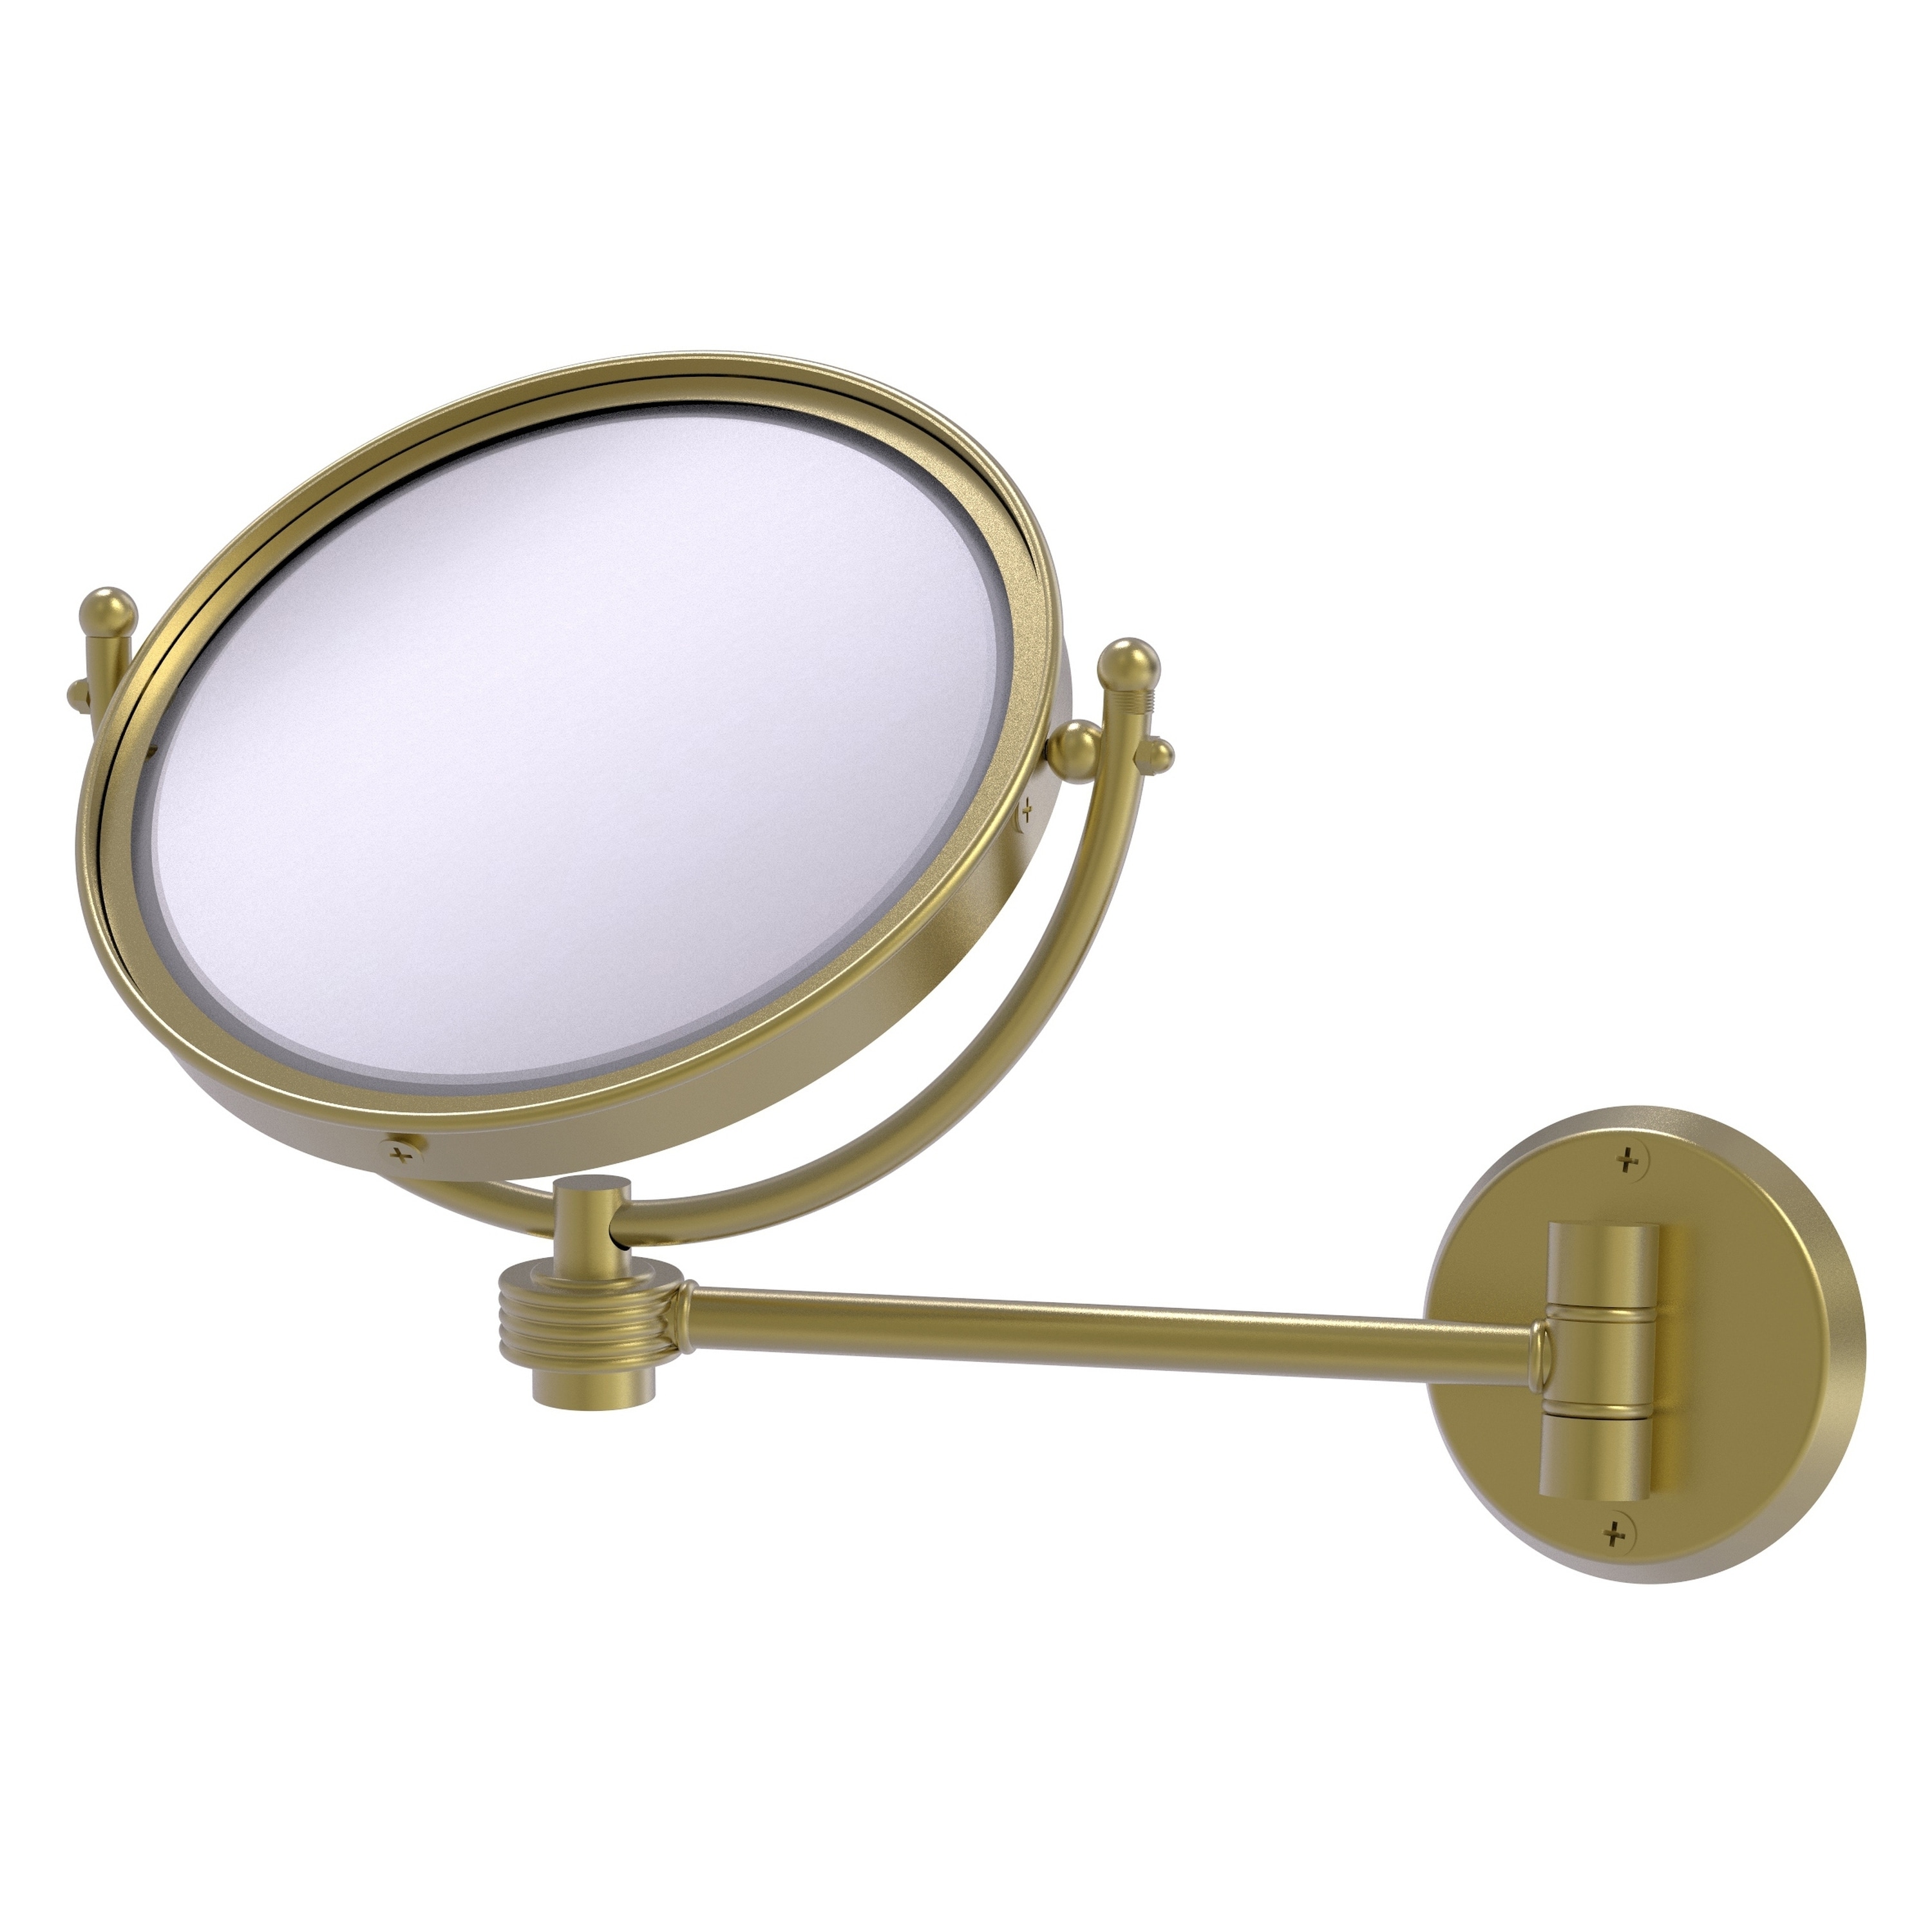 8-in x 10-in Satin Chrome Double-sided 3X Magnifying Wall-mounted Vanity Mirror | - Allied Brass WM-5G/3X-SBR